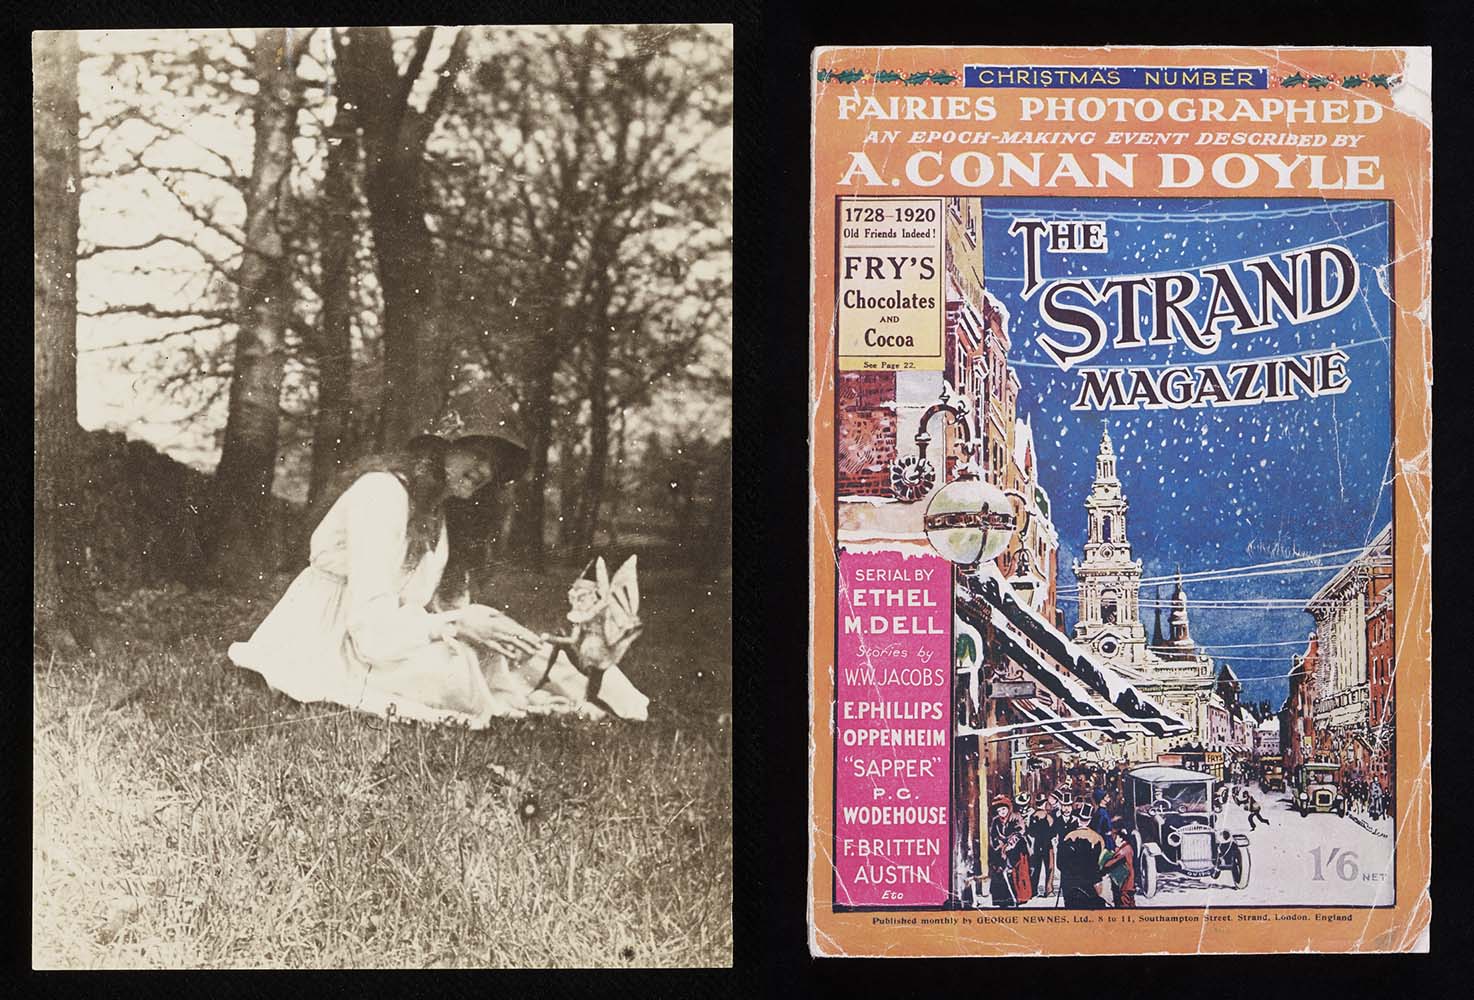 The Strand Magazine and one of the Cottingley Fairy photos